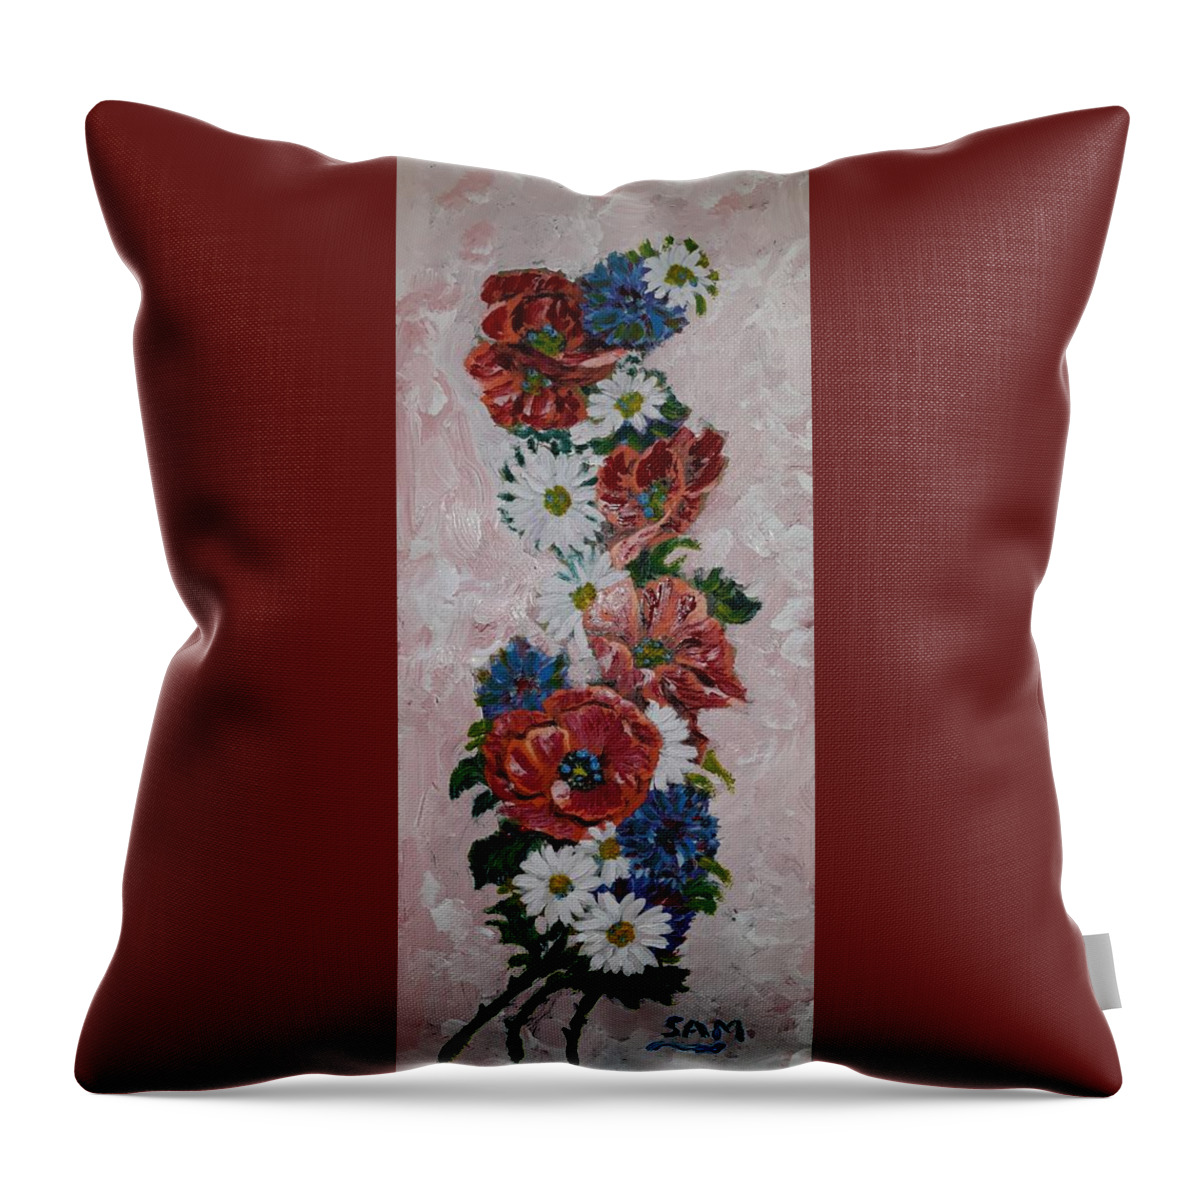 Flowers Throw Pillow featuring the painting Exotic Wall Art by Sam Shaker